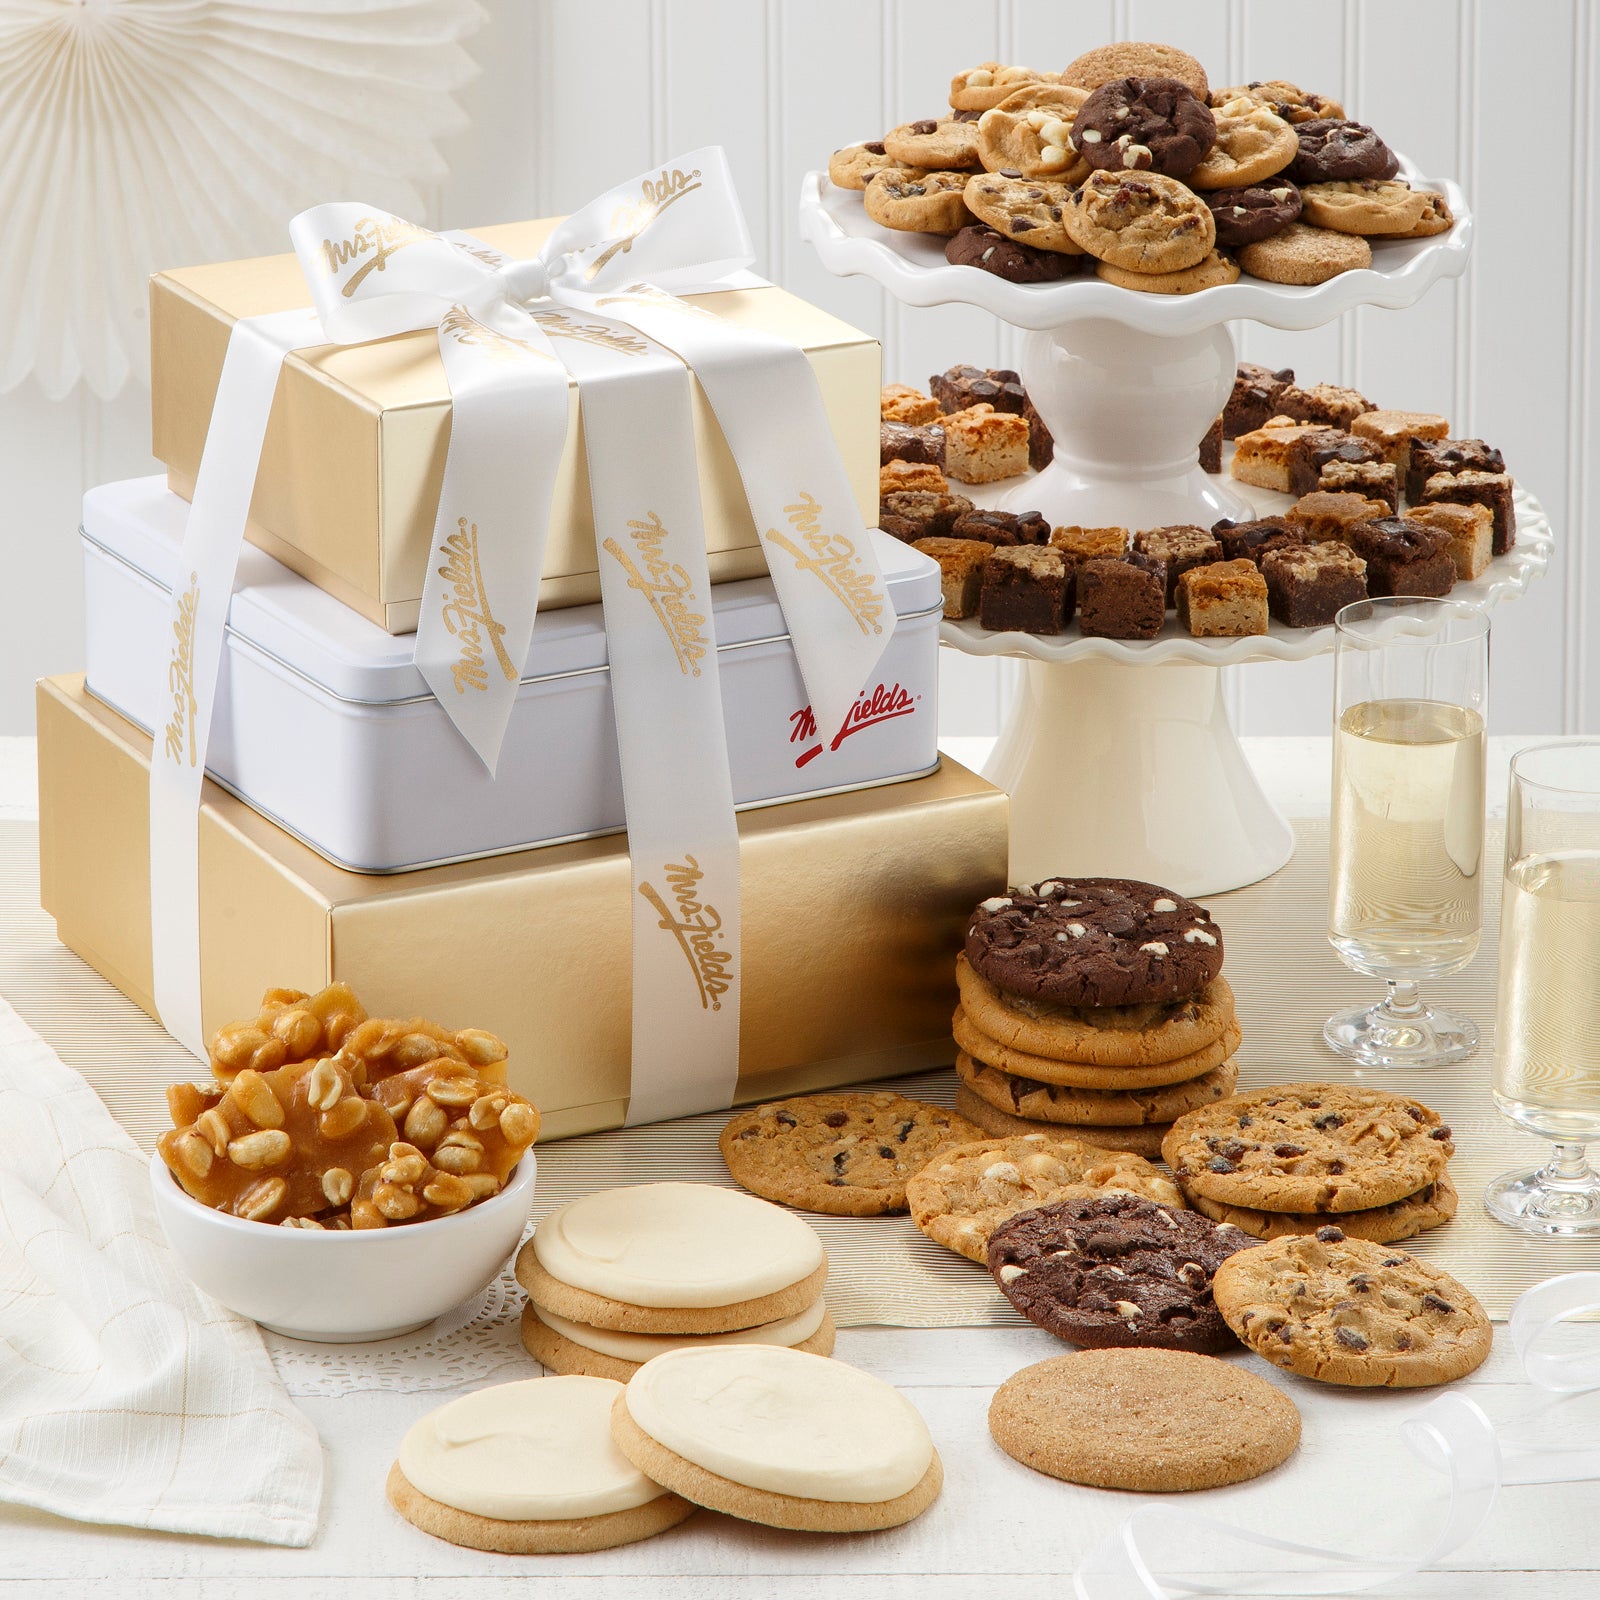 A three-tier gold and white tower tied with a white and gold Mrs. Fields ribbon and surrounded by an assortment of Nibblers®, original cookies, four frosted cookies, peanut brittle. 